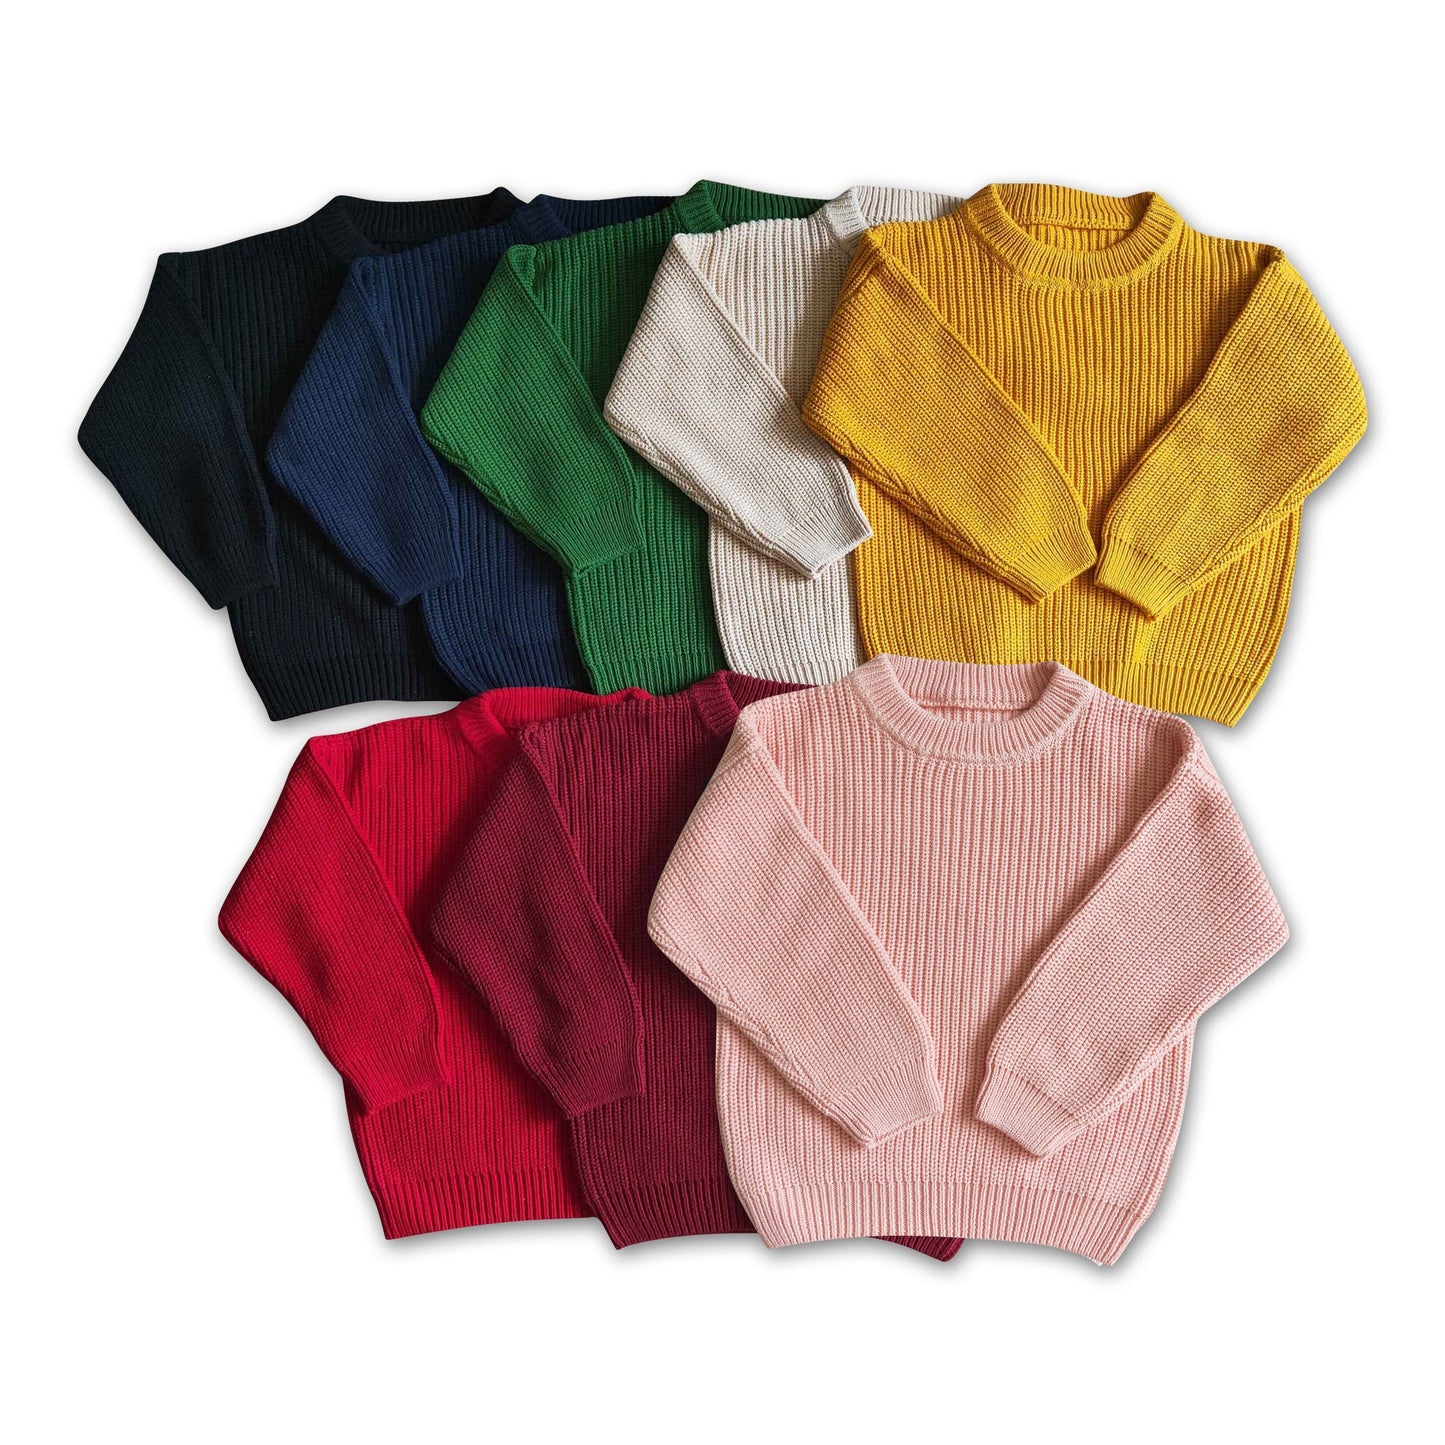 Colorful cotton winter sweaters